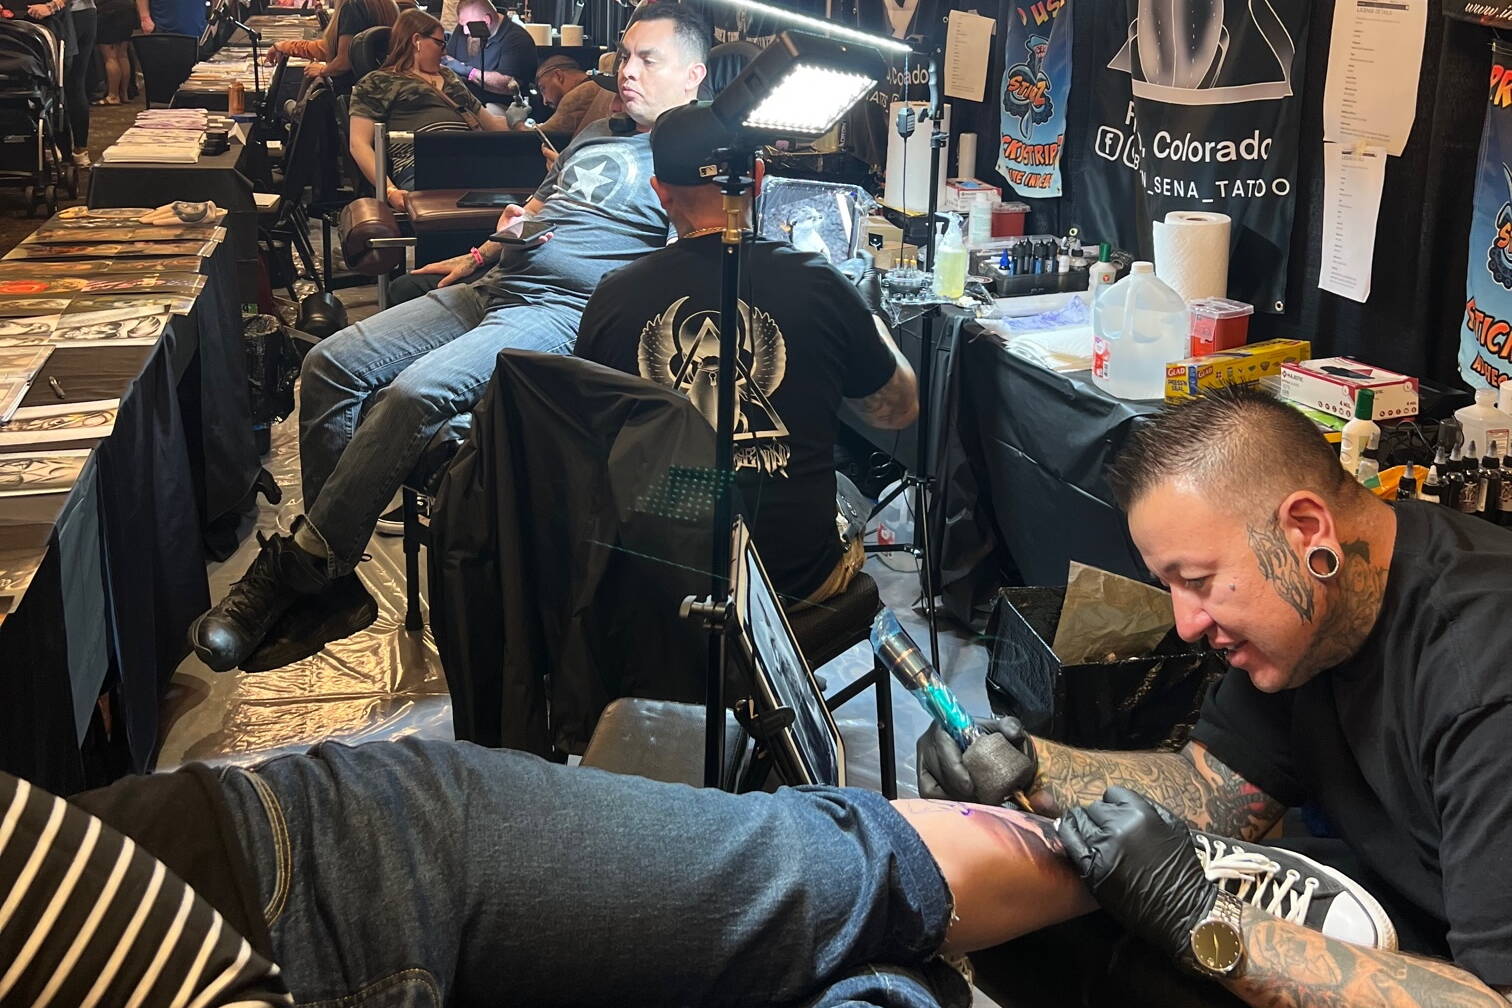 Tattoo artists make their marks on attendees at an Ink Masters Tattoo Show in Colorado. (Courtesy of Ink Masters)